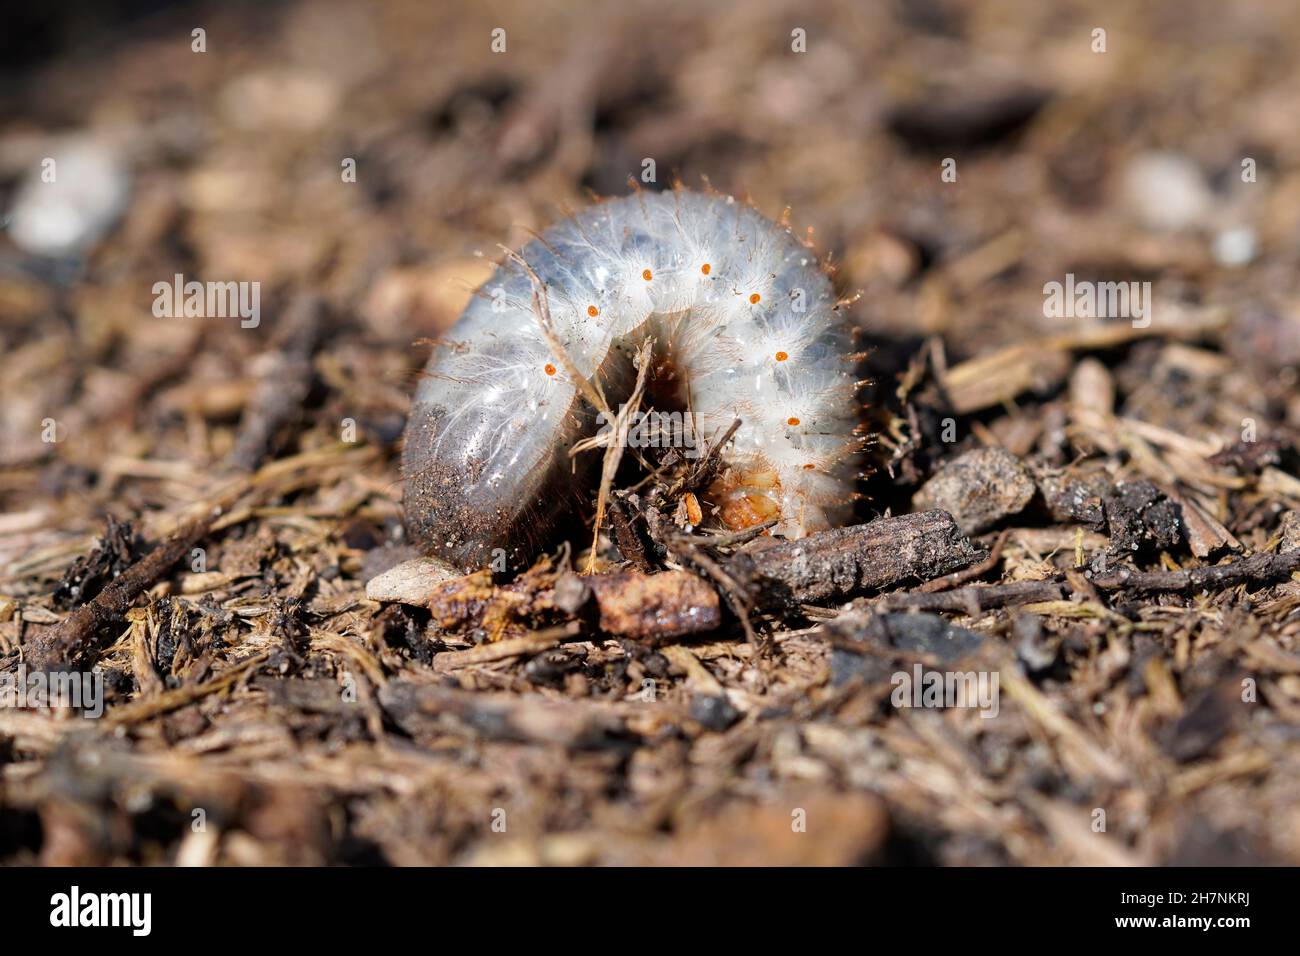 White Worm Close-up. the Larva of the May Beetle, Close-up Selective Focus.  Bait for Fishing Stock Image - Image of pest, natural: 174169279